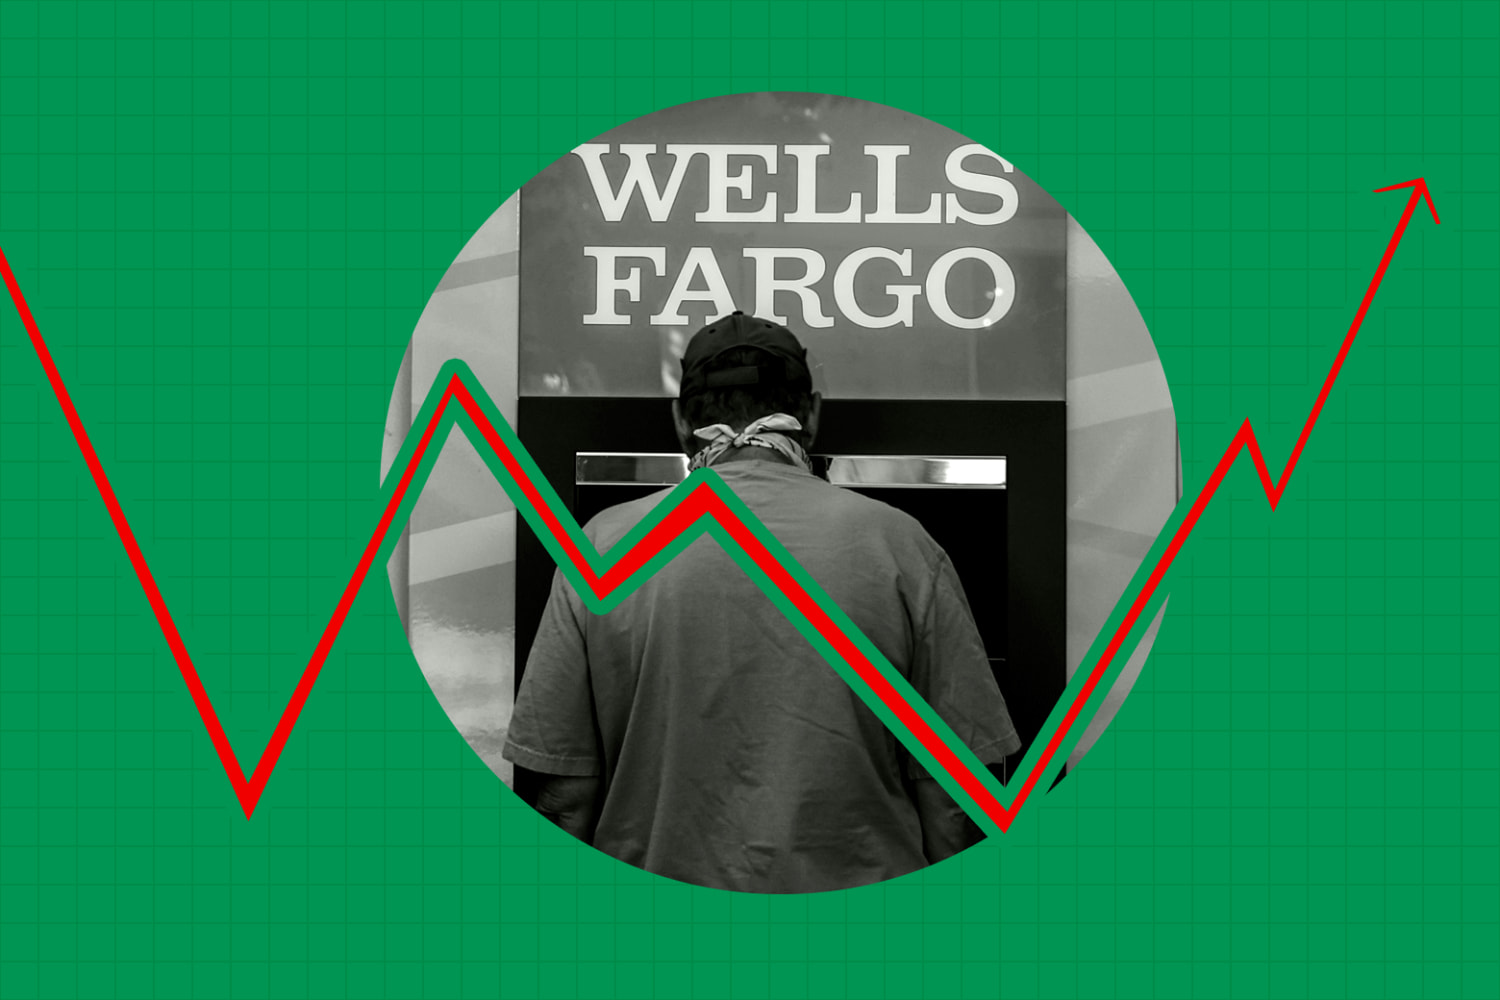 How Wells Fargo Became Synonymous With Scandal